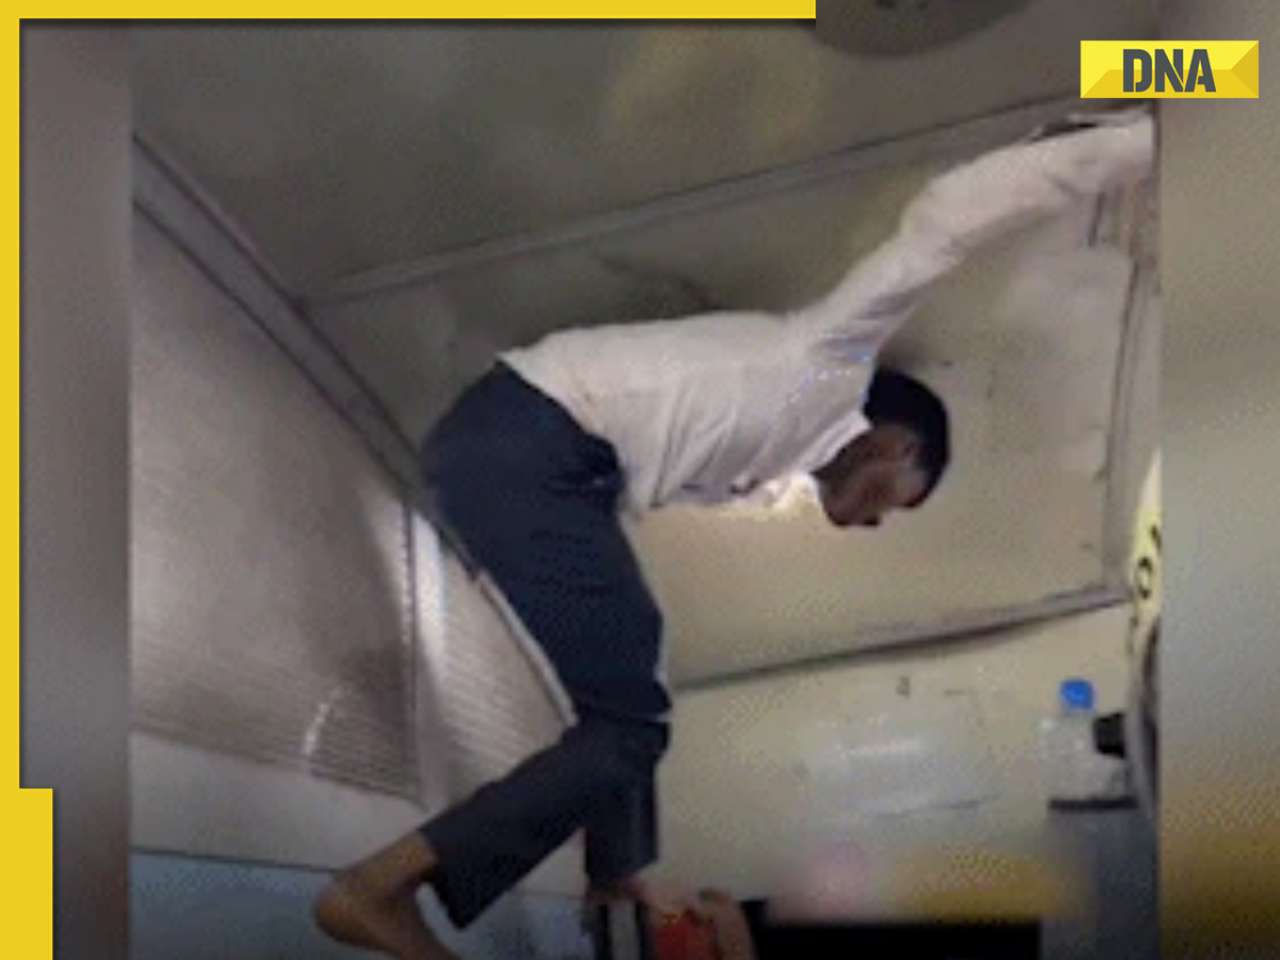 Passenger's 'spiderman' stunt in overcrowded train to reach toilet goes viral